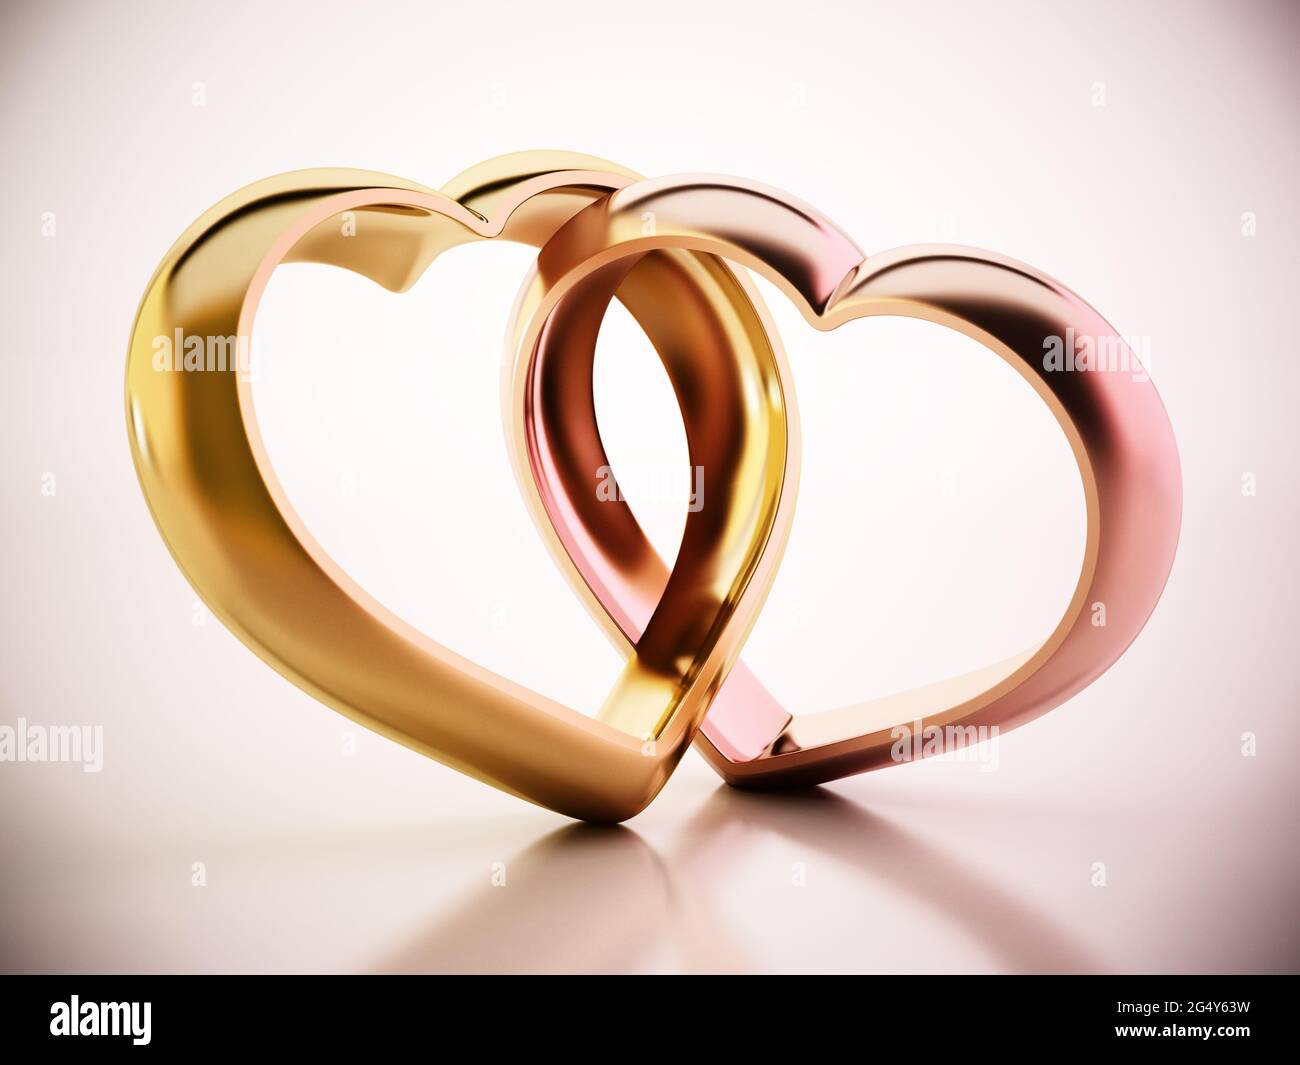 Two attached heart shaped rings. 3D illustration. Stock Photo